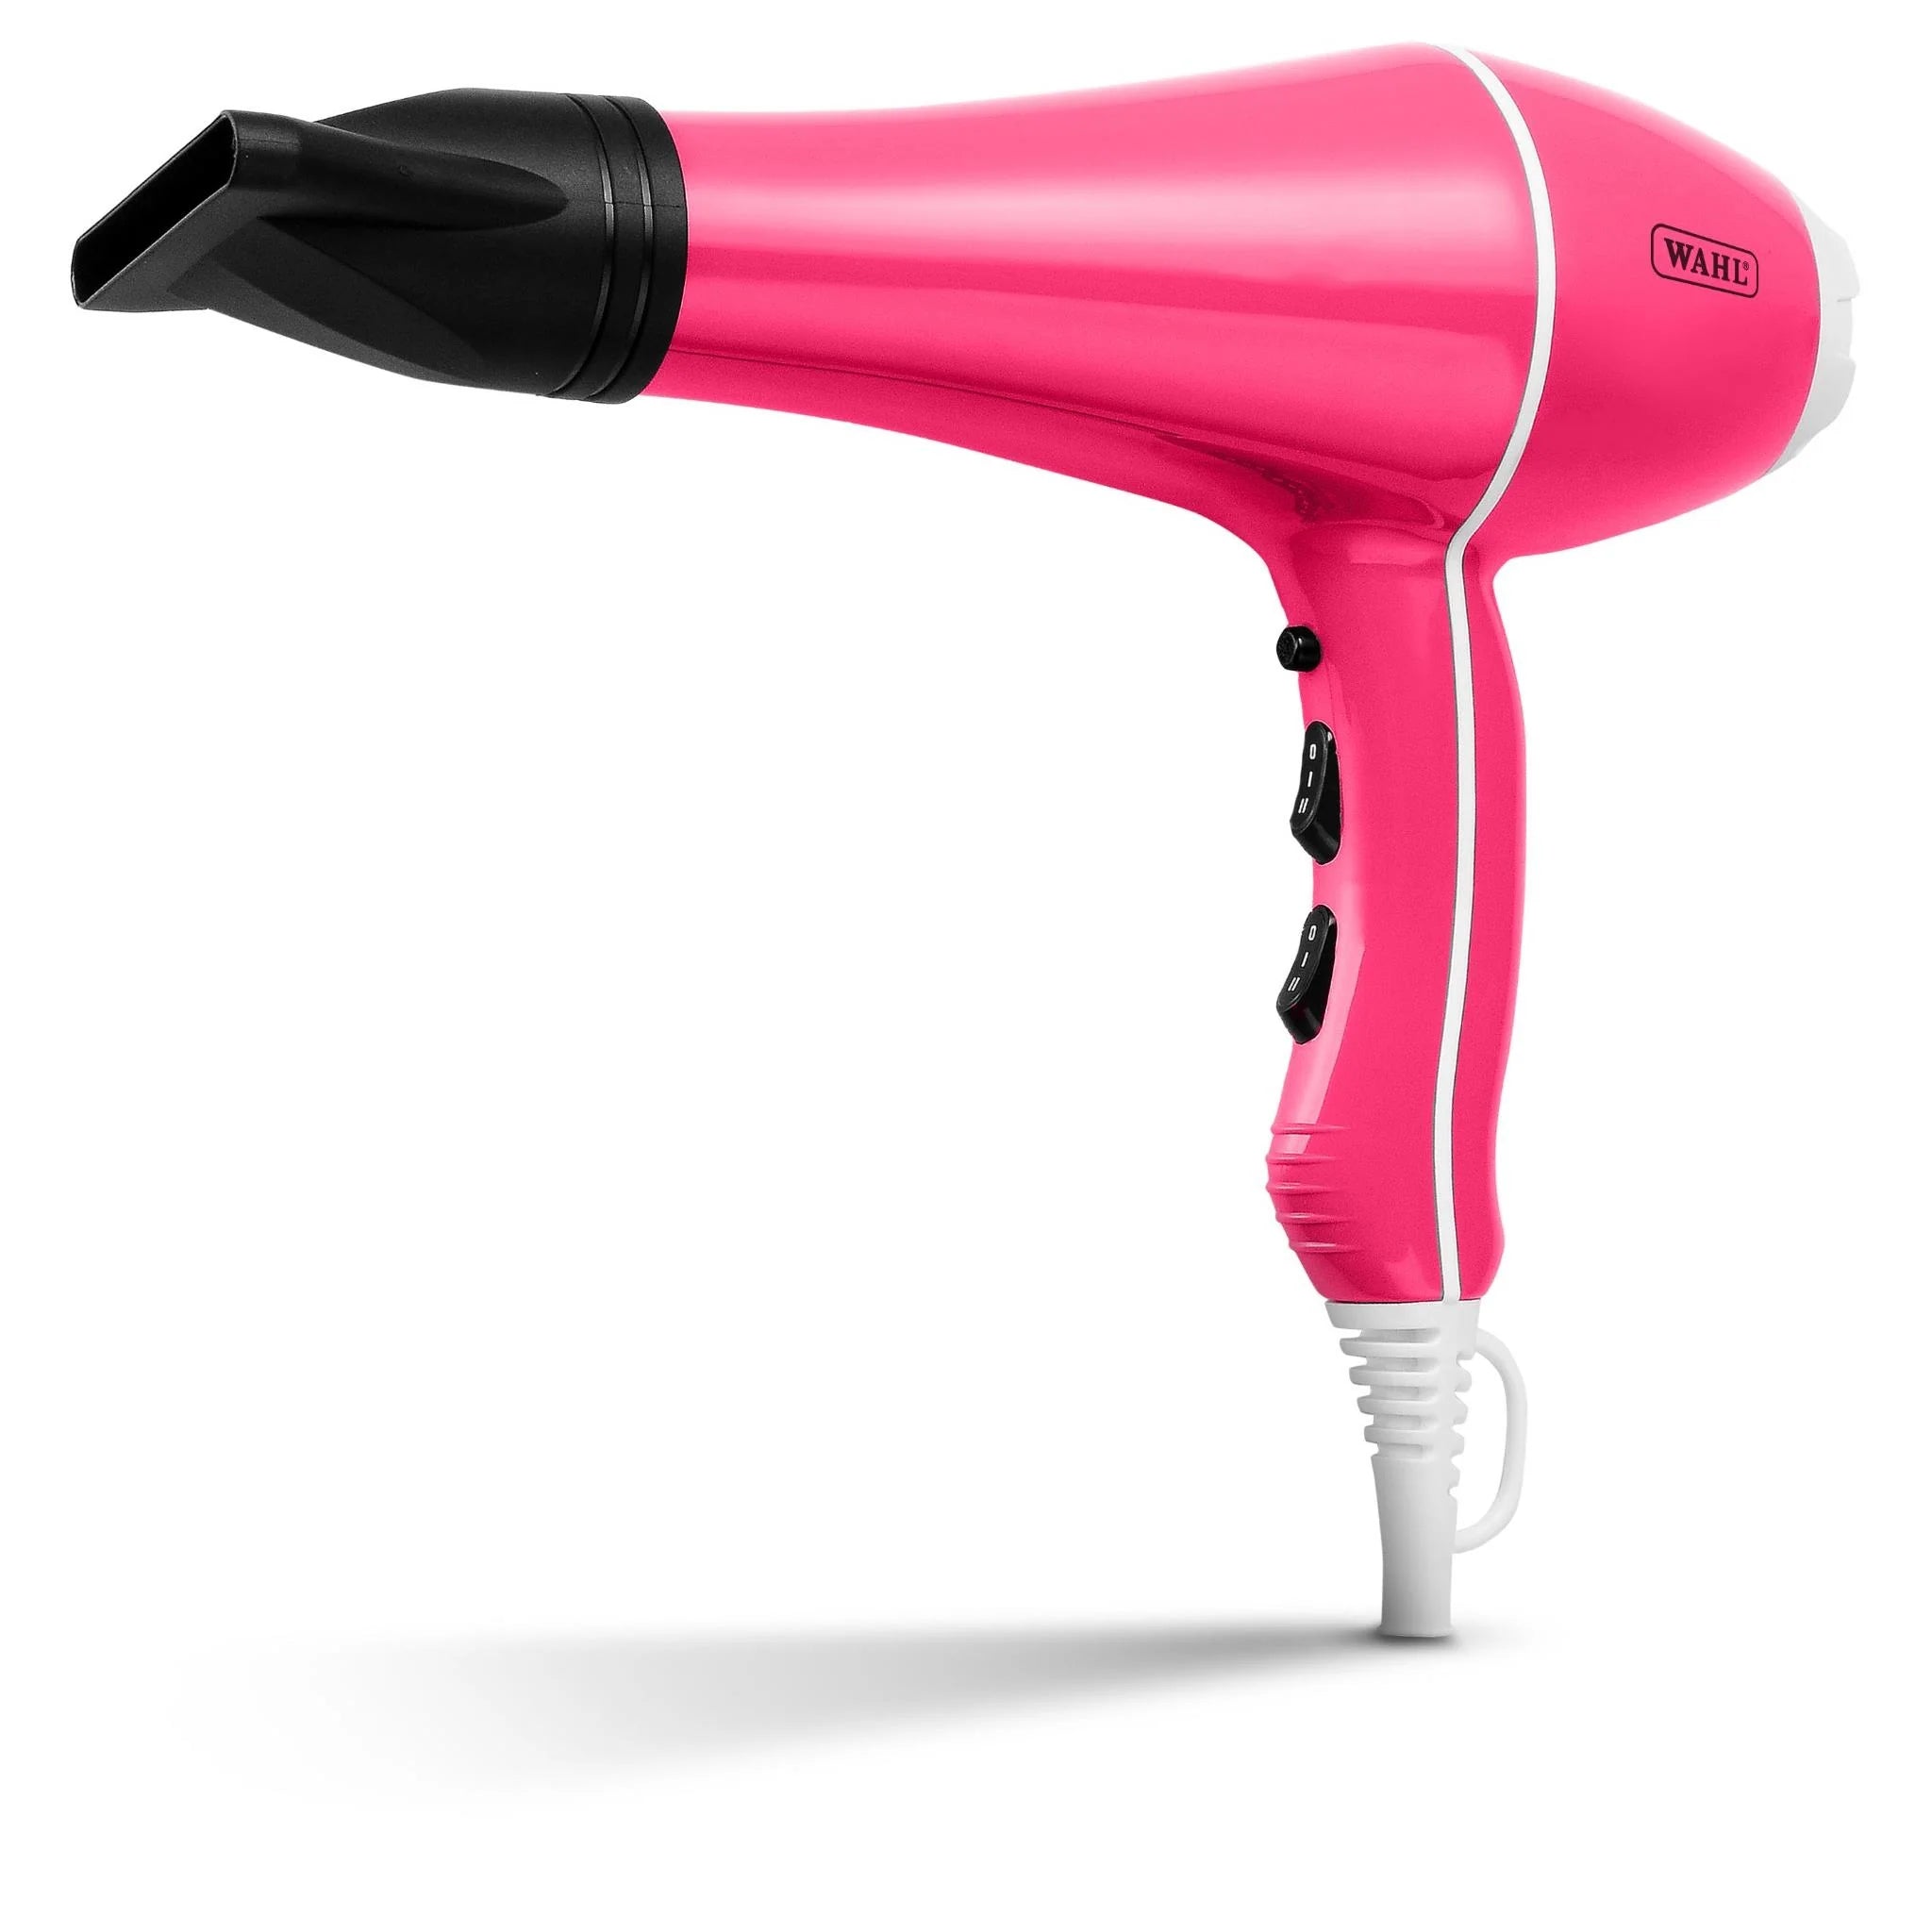 WAHL POWER DRY HOT PINK